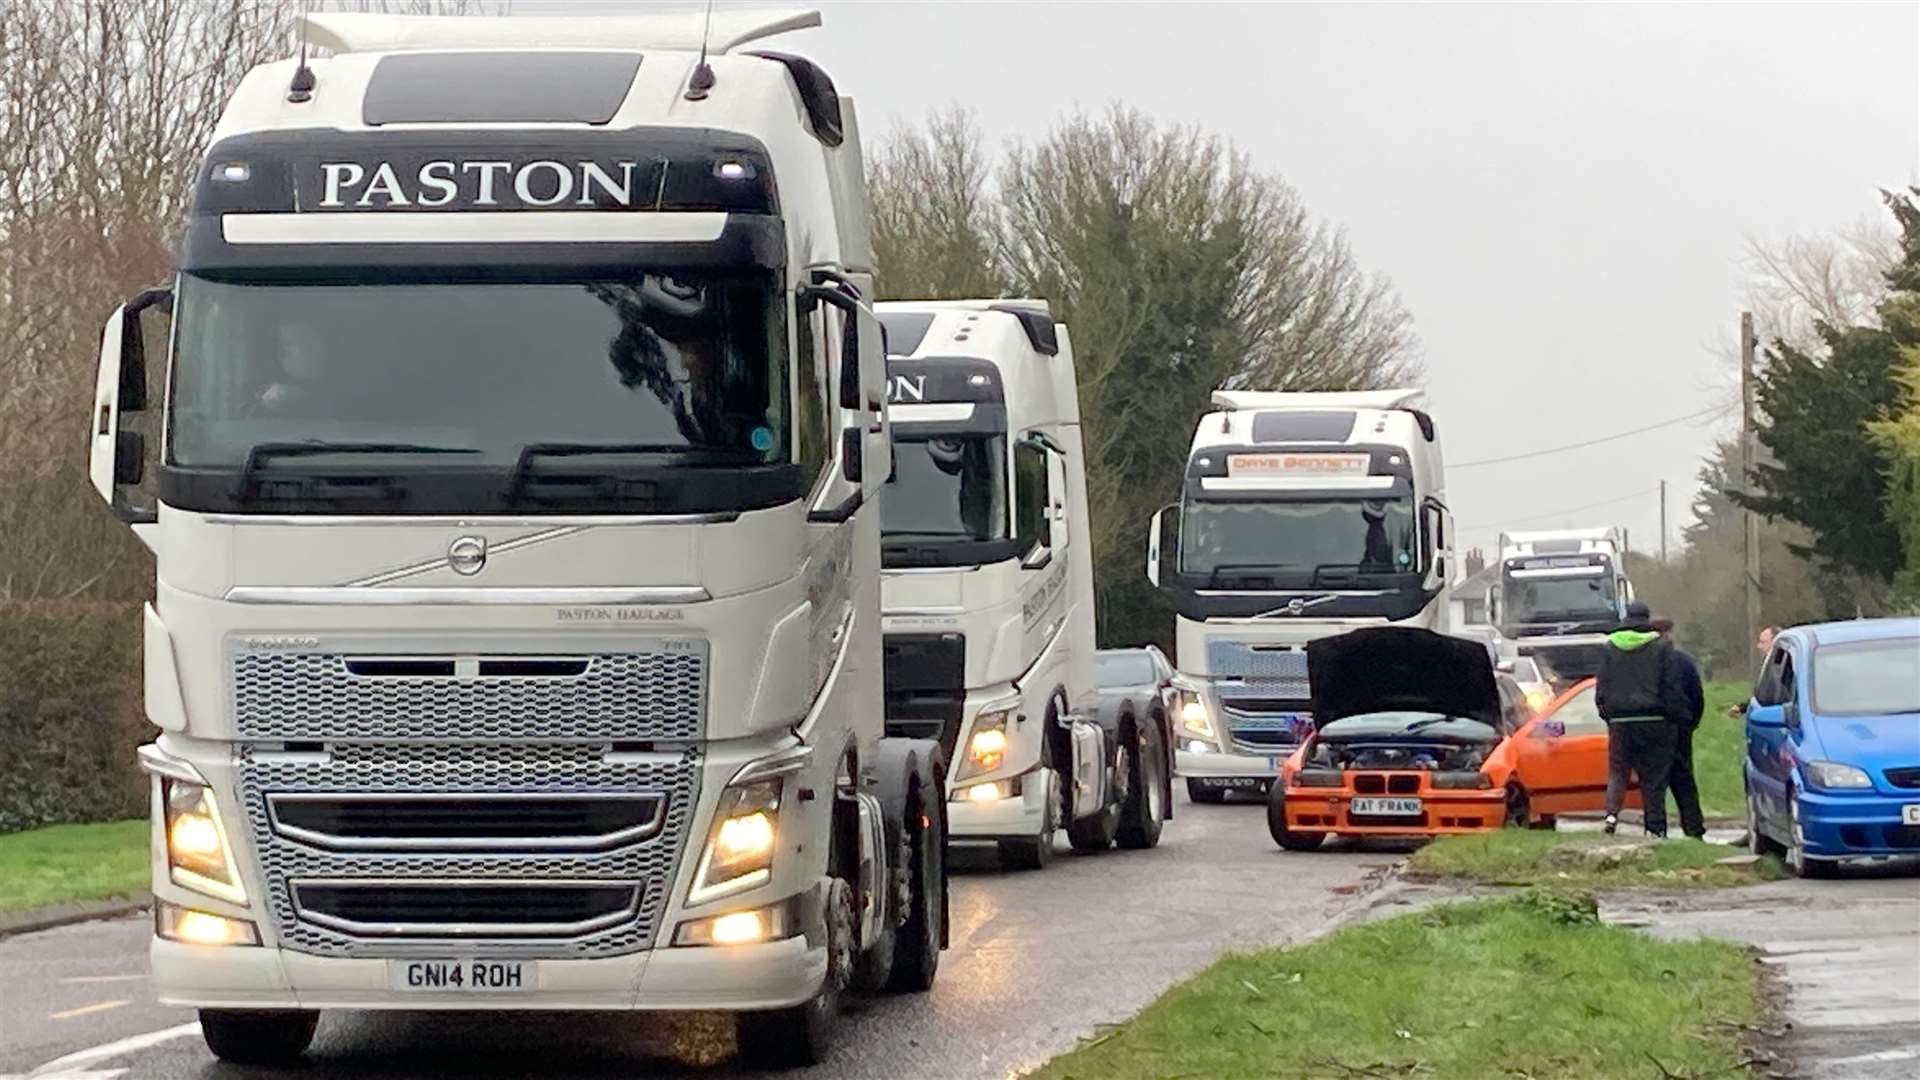 A cavalcade of lorries joined the funeral procession for car-mad Frankie Wright at the Garden of England cemetery, Bobbing